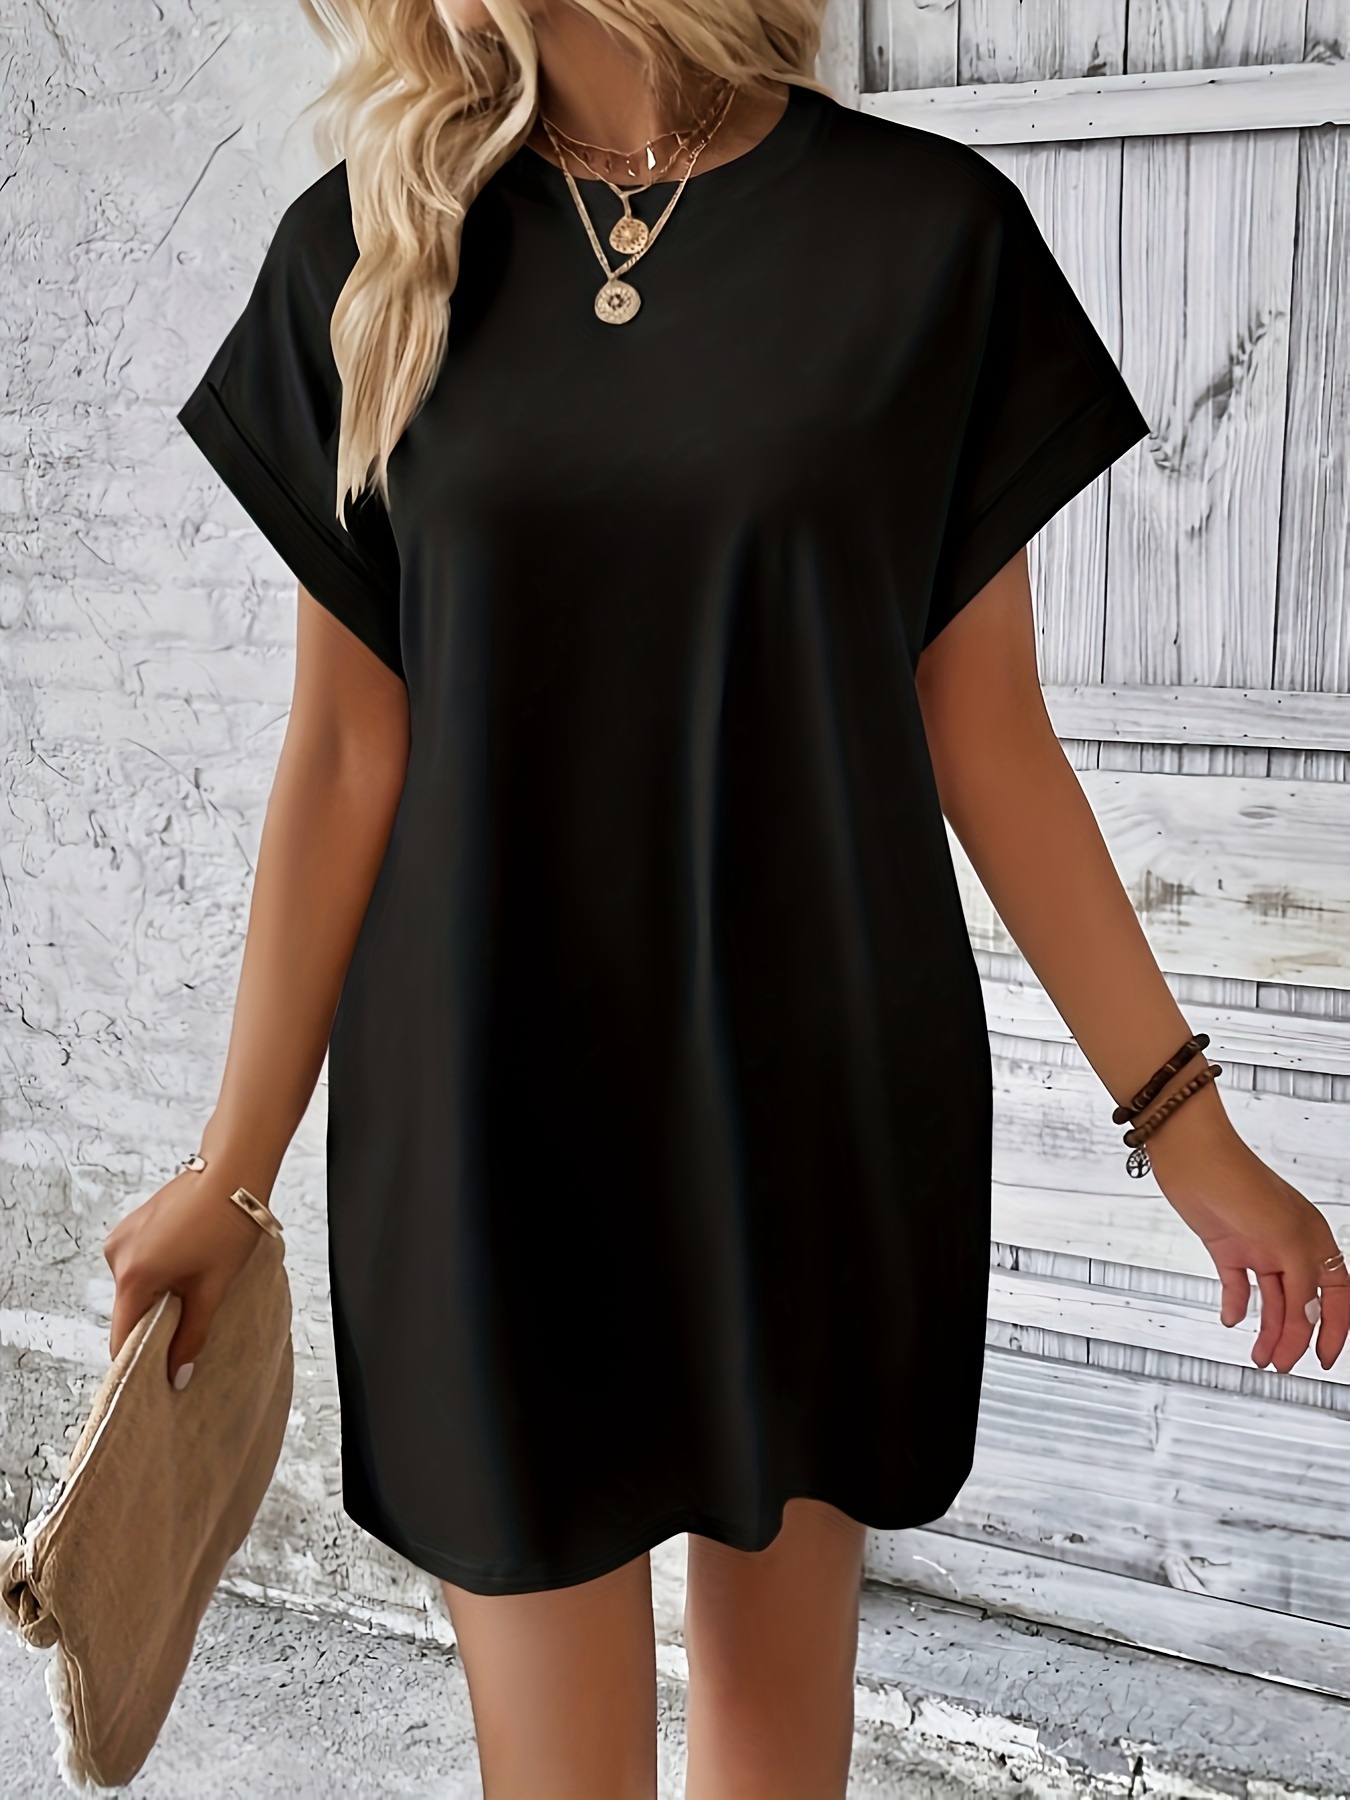 solid color crew neck dress casual short sleeve loose fit dress for spring summer womens clothing details 7